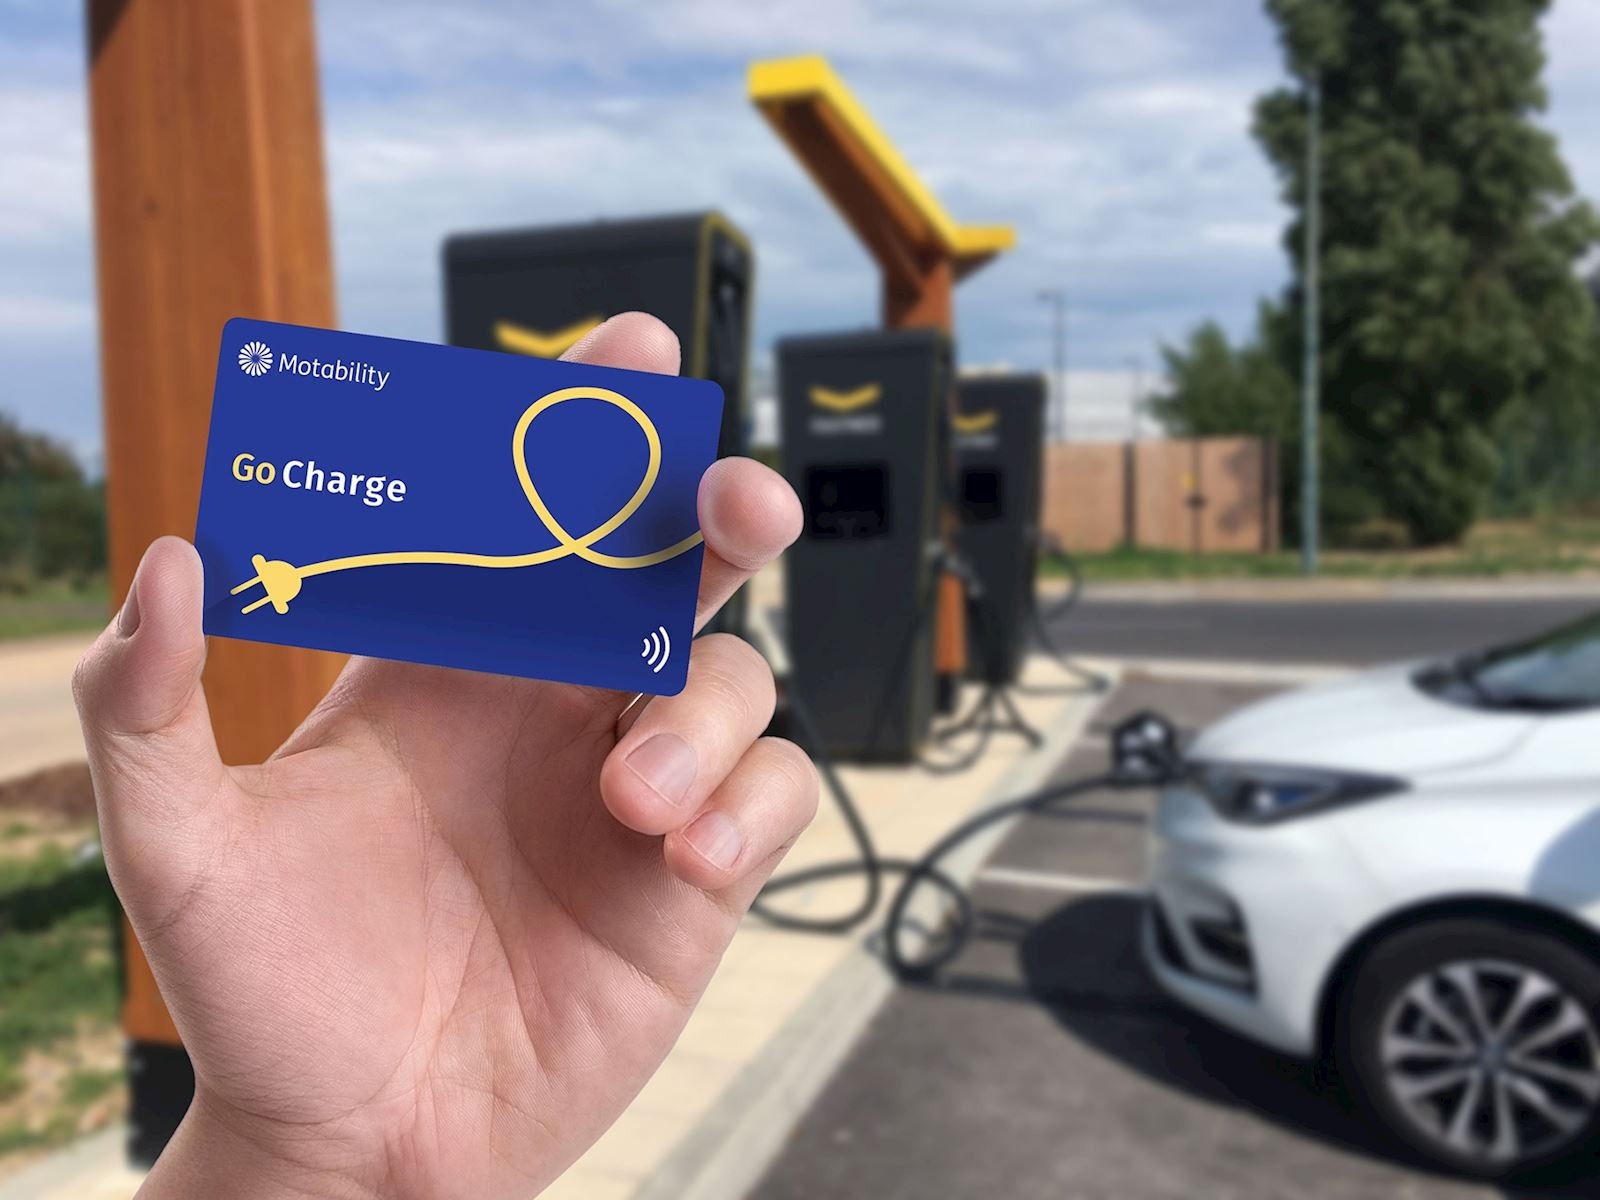 GO CHARGE FROM MOTABILITY OPERATIONS